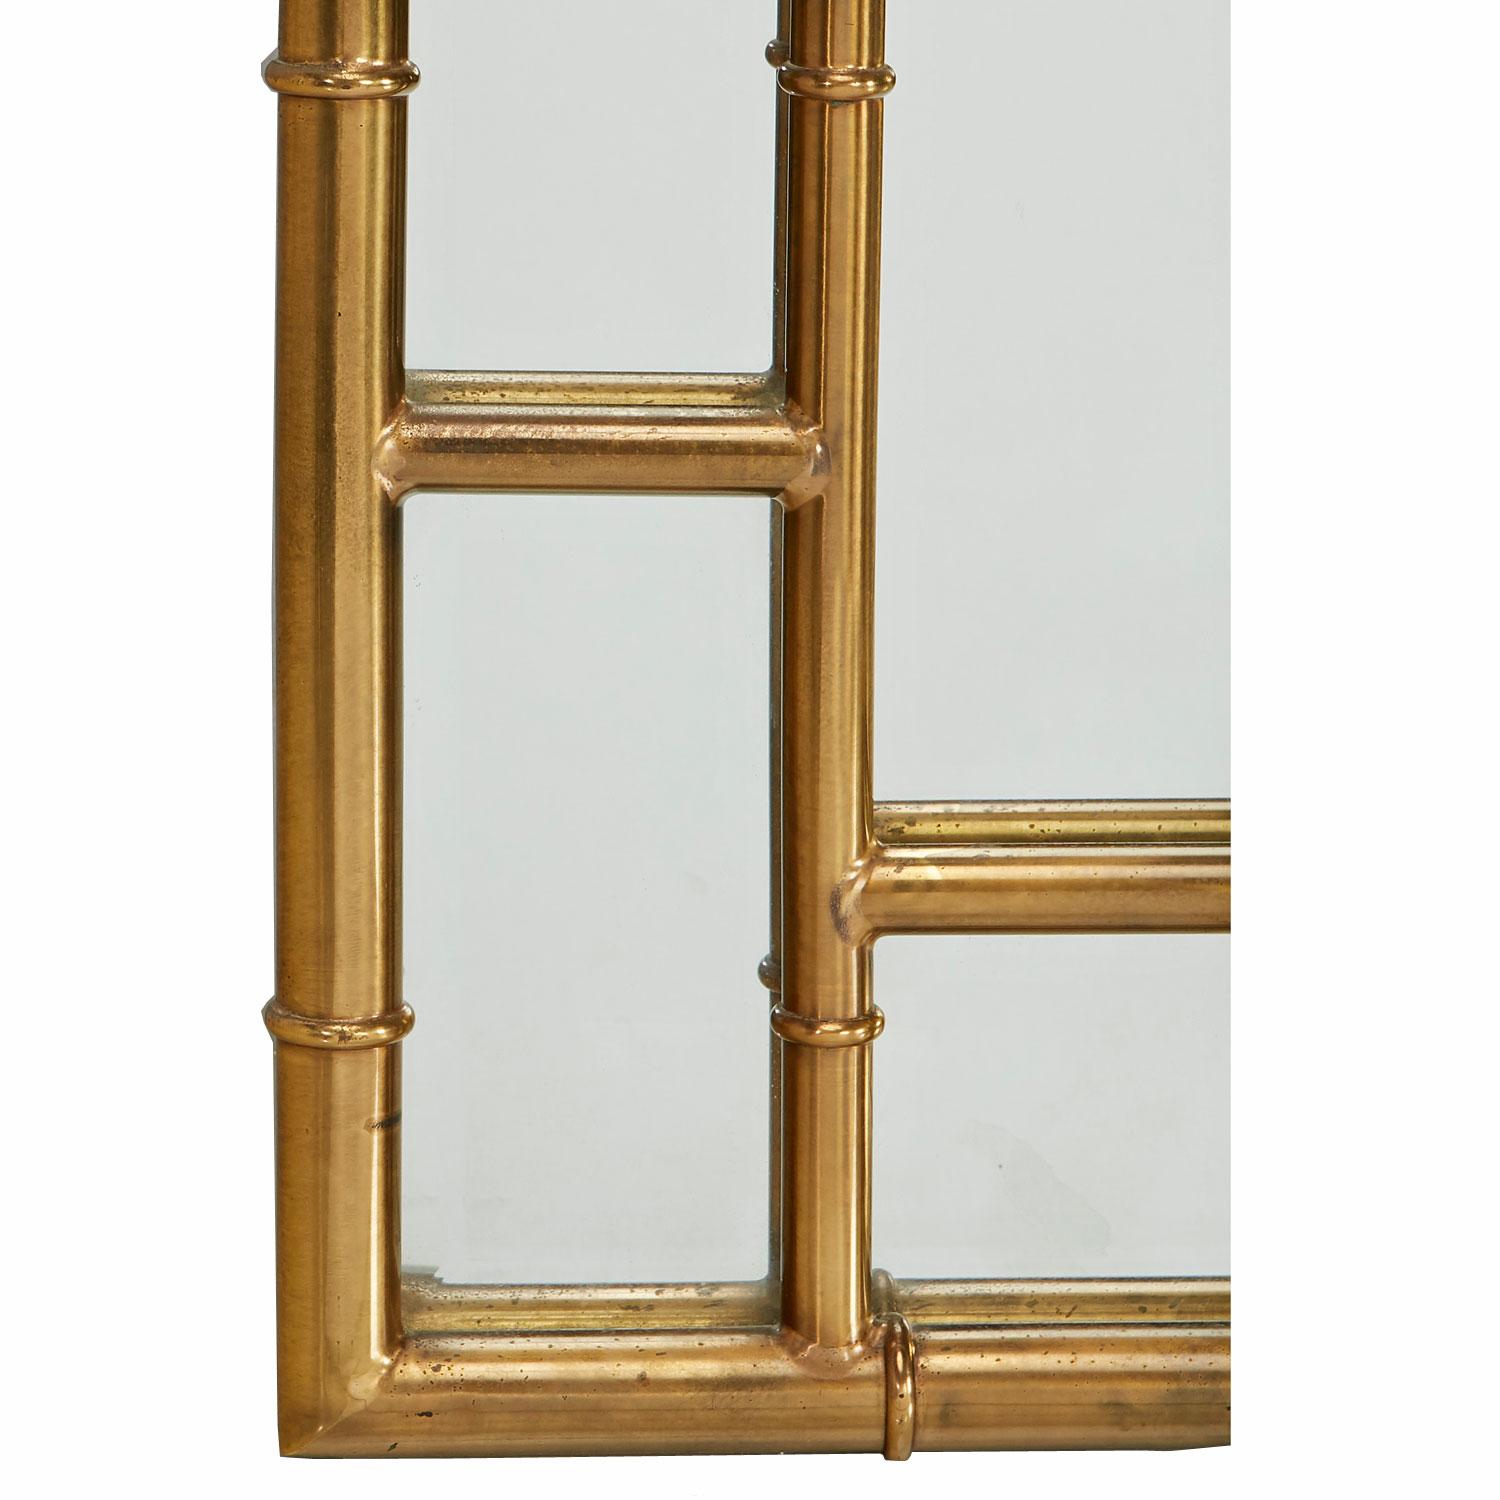 Breathtaking Hollywood Regency brass Mastercraft mirror. The frame is fashioned in the style of bamboo stalks to add an eastern flare. Hollywood Regency and Asian modern meld together beautifully in this stunning and distinct Mastercraft mirror.